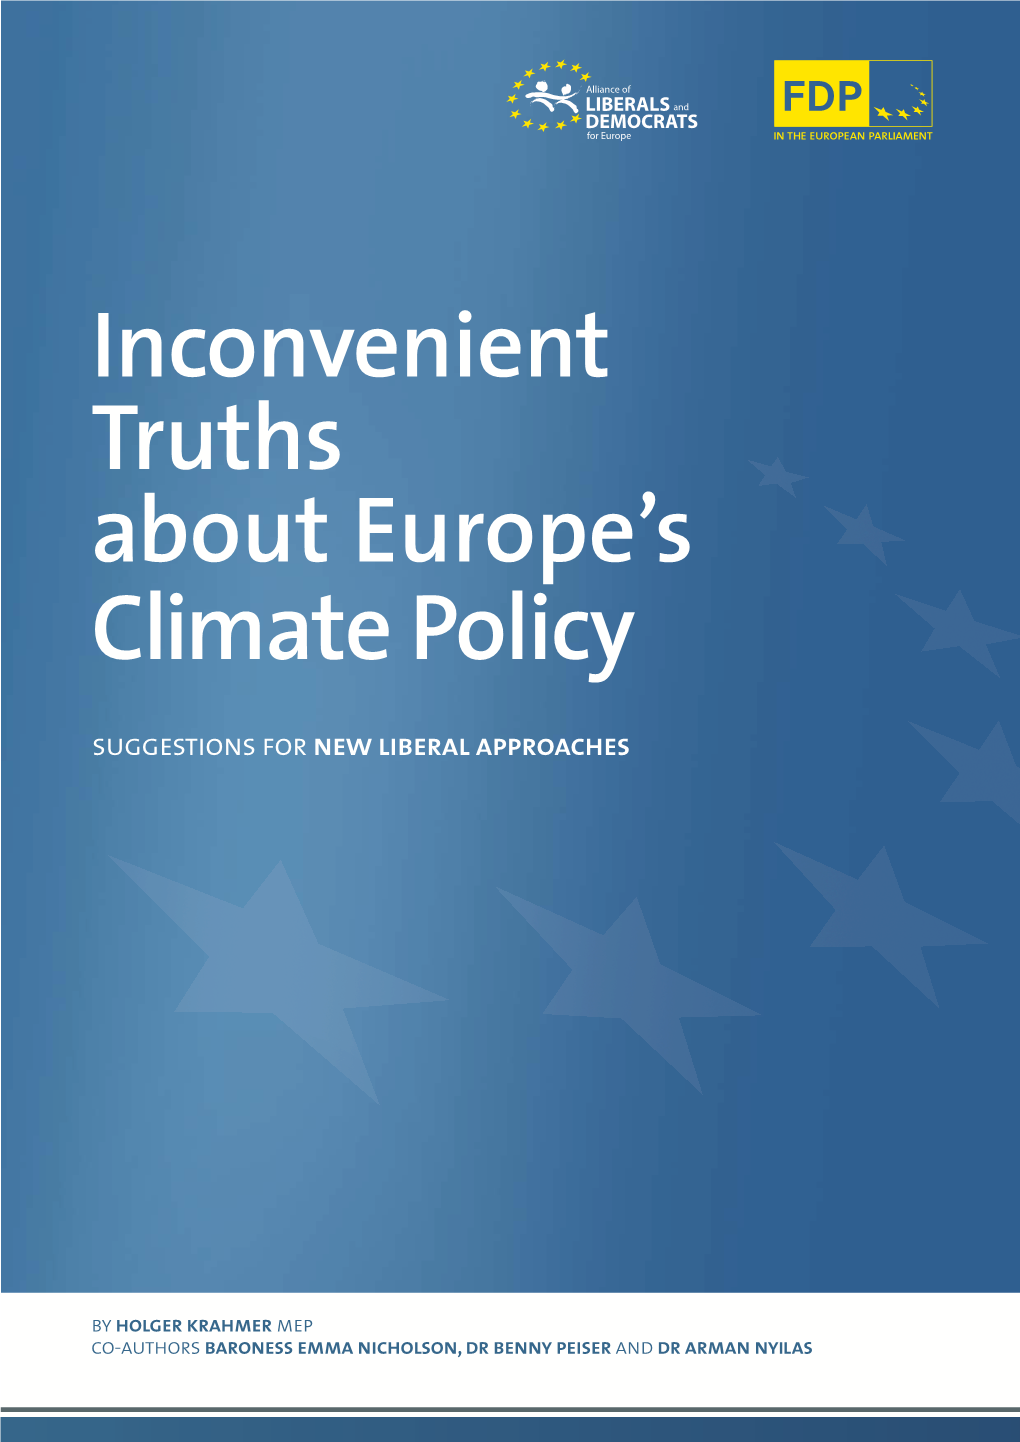 Inconvenient Truths About Europe's Climate Policy